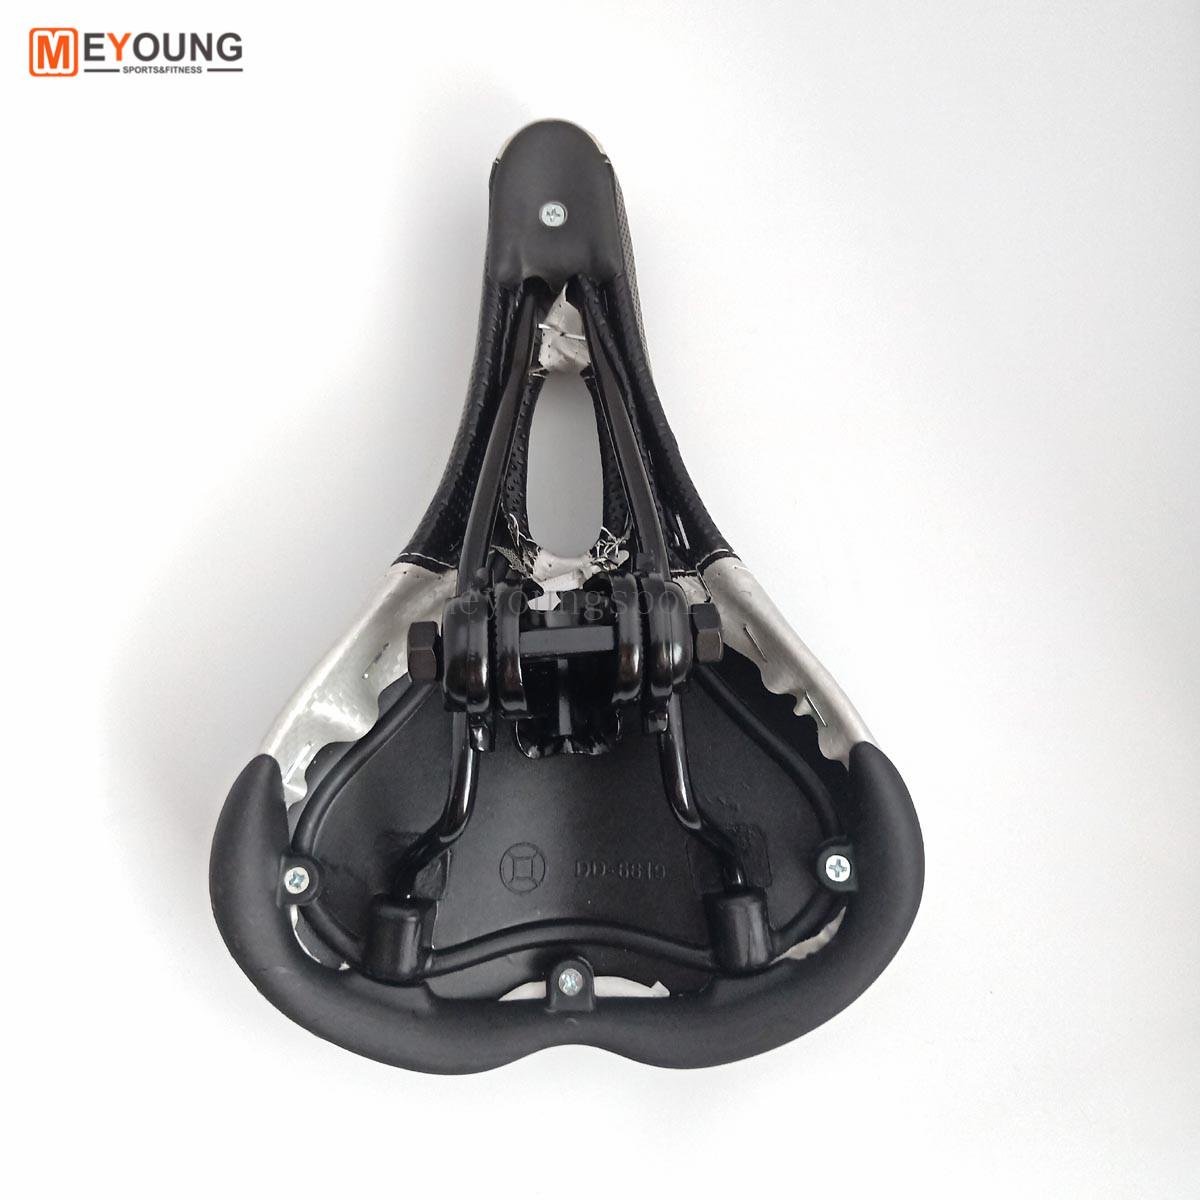 Stationary Spin Bike Seats Fitness Equipment Spare Parts Saddle 5